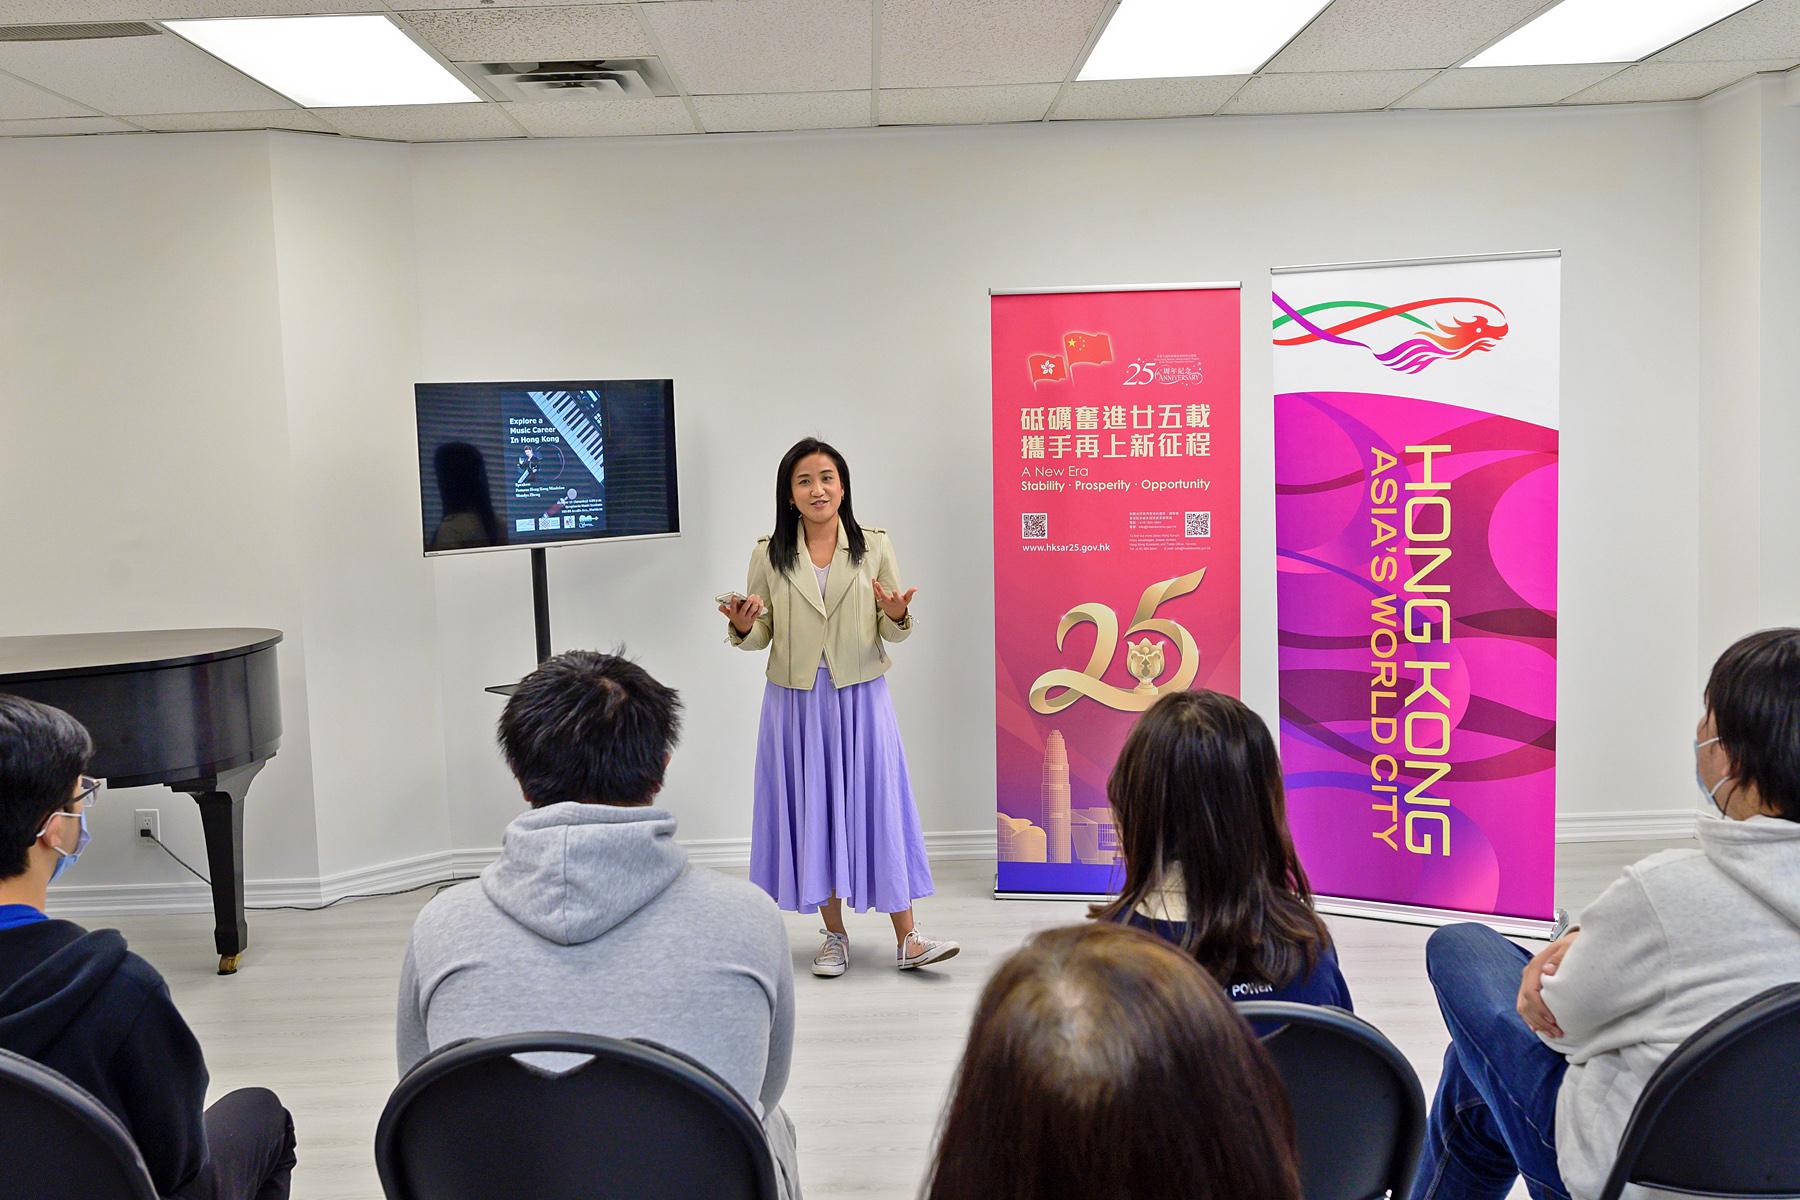 The Director of the Hong Kong Economic and Trade Office (Toronto), Ms Emily Mo, attends the music seminar entitled "Explore a Music Career in Hong Kong" in Toronto, Canada, to celebrate the 25th anniversary of the establishment of the Hong Kong Special Administrative Region on October 15 (Toronto time).